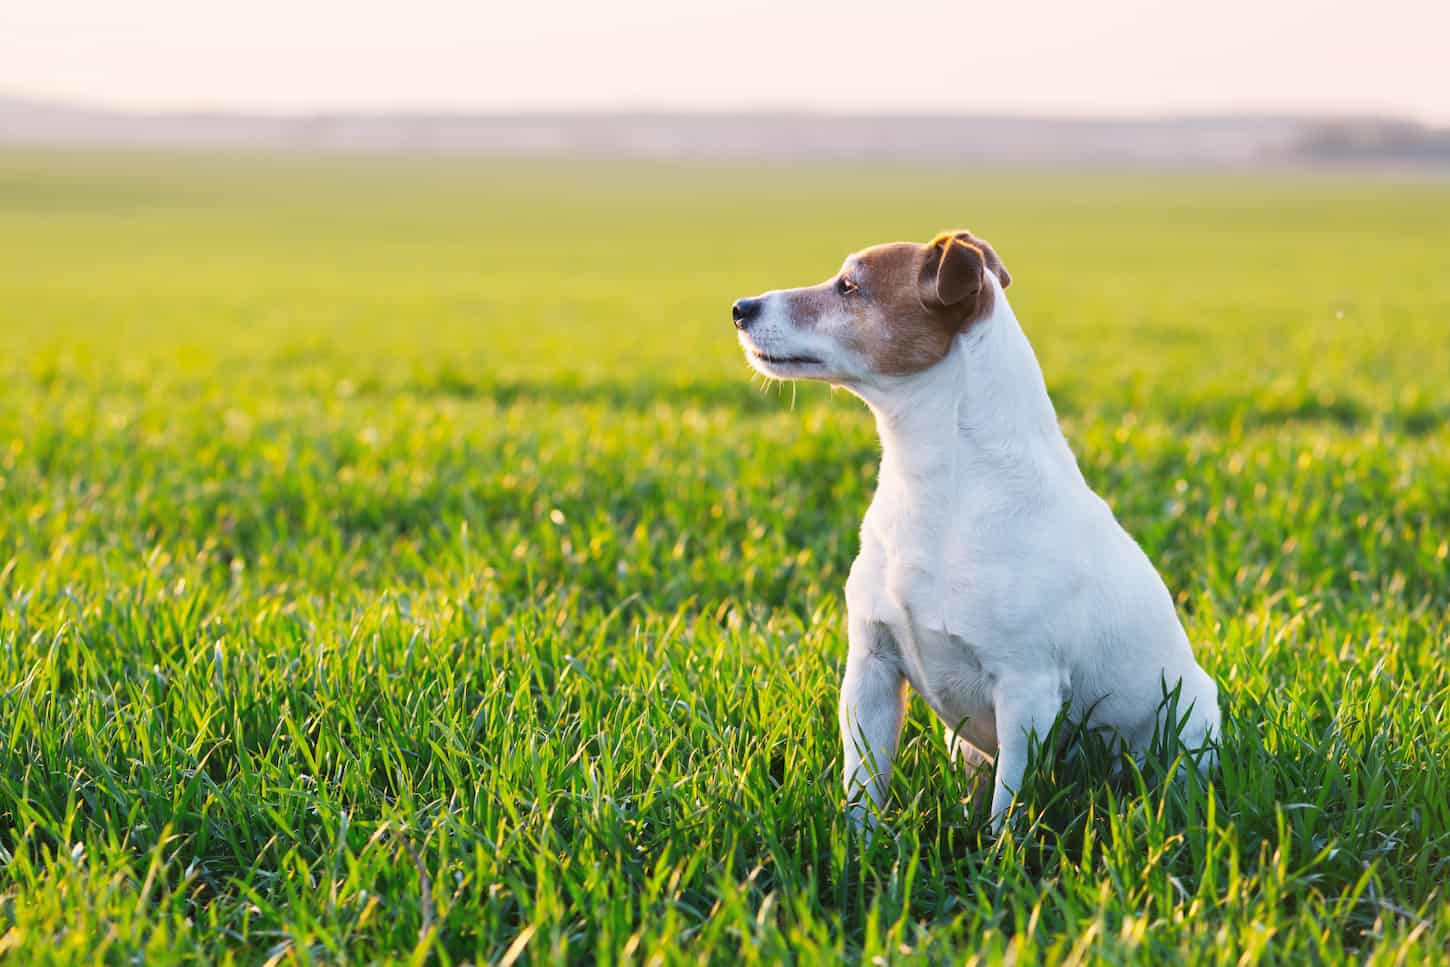 An image of a Jack Russle terrier dog on a green field.